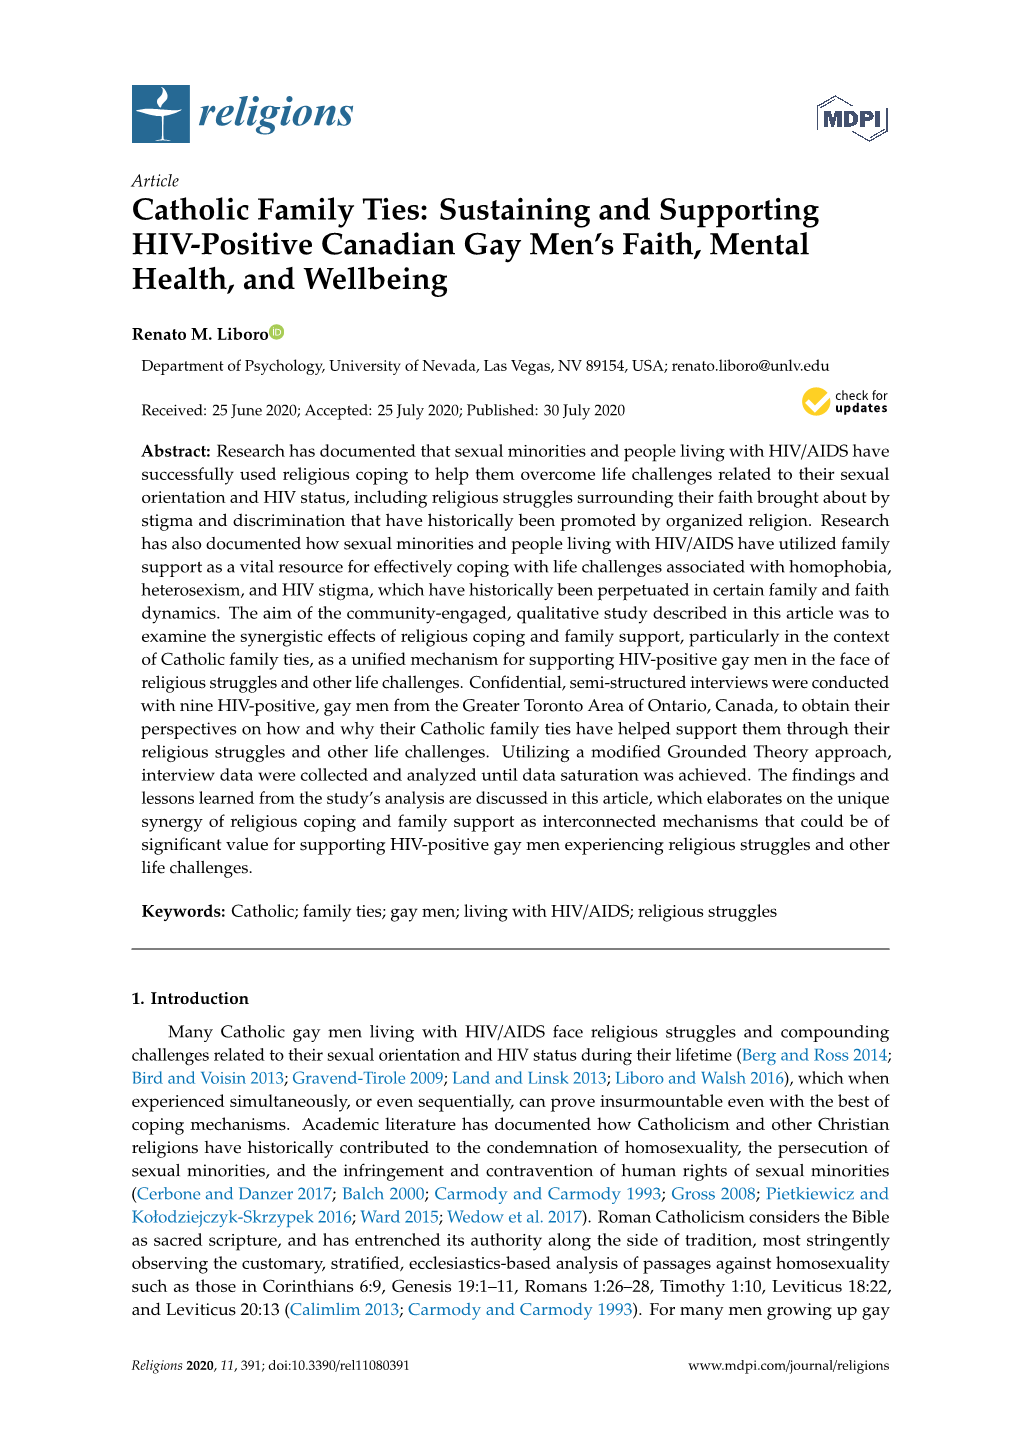 Catholic Family Ties: Sustaining and Supporting HIV-Positive Canadian Gay Men’S Faith, Mental Health, and Wellbeing